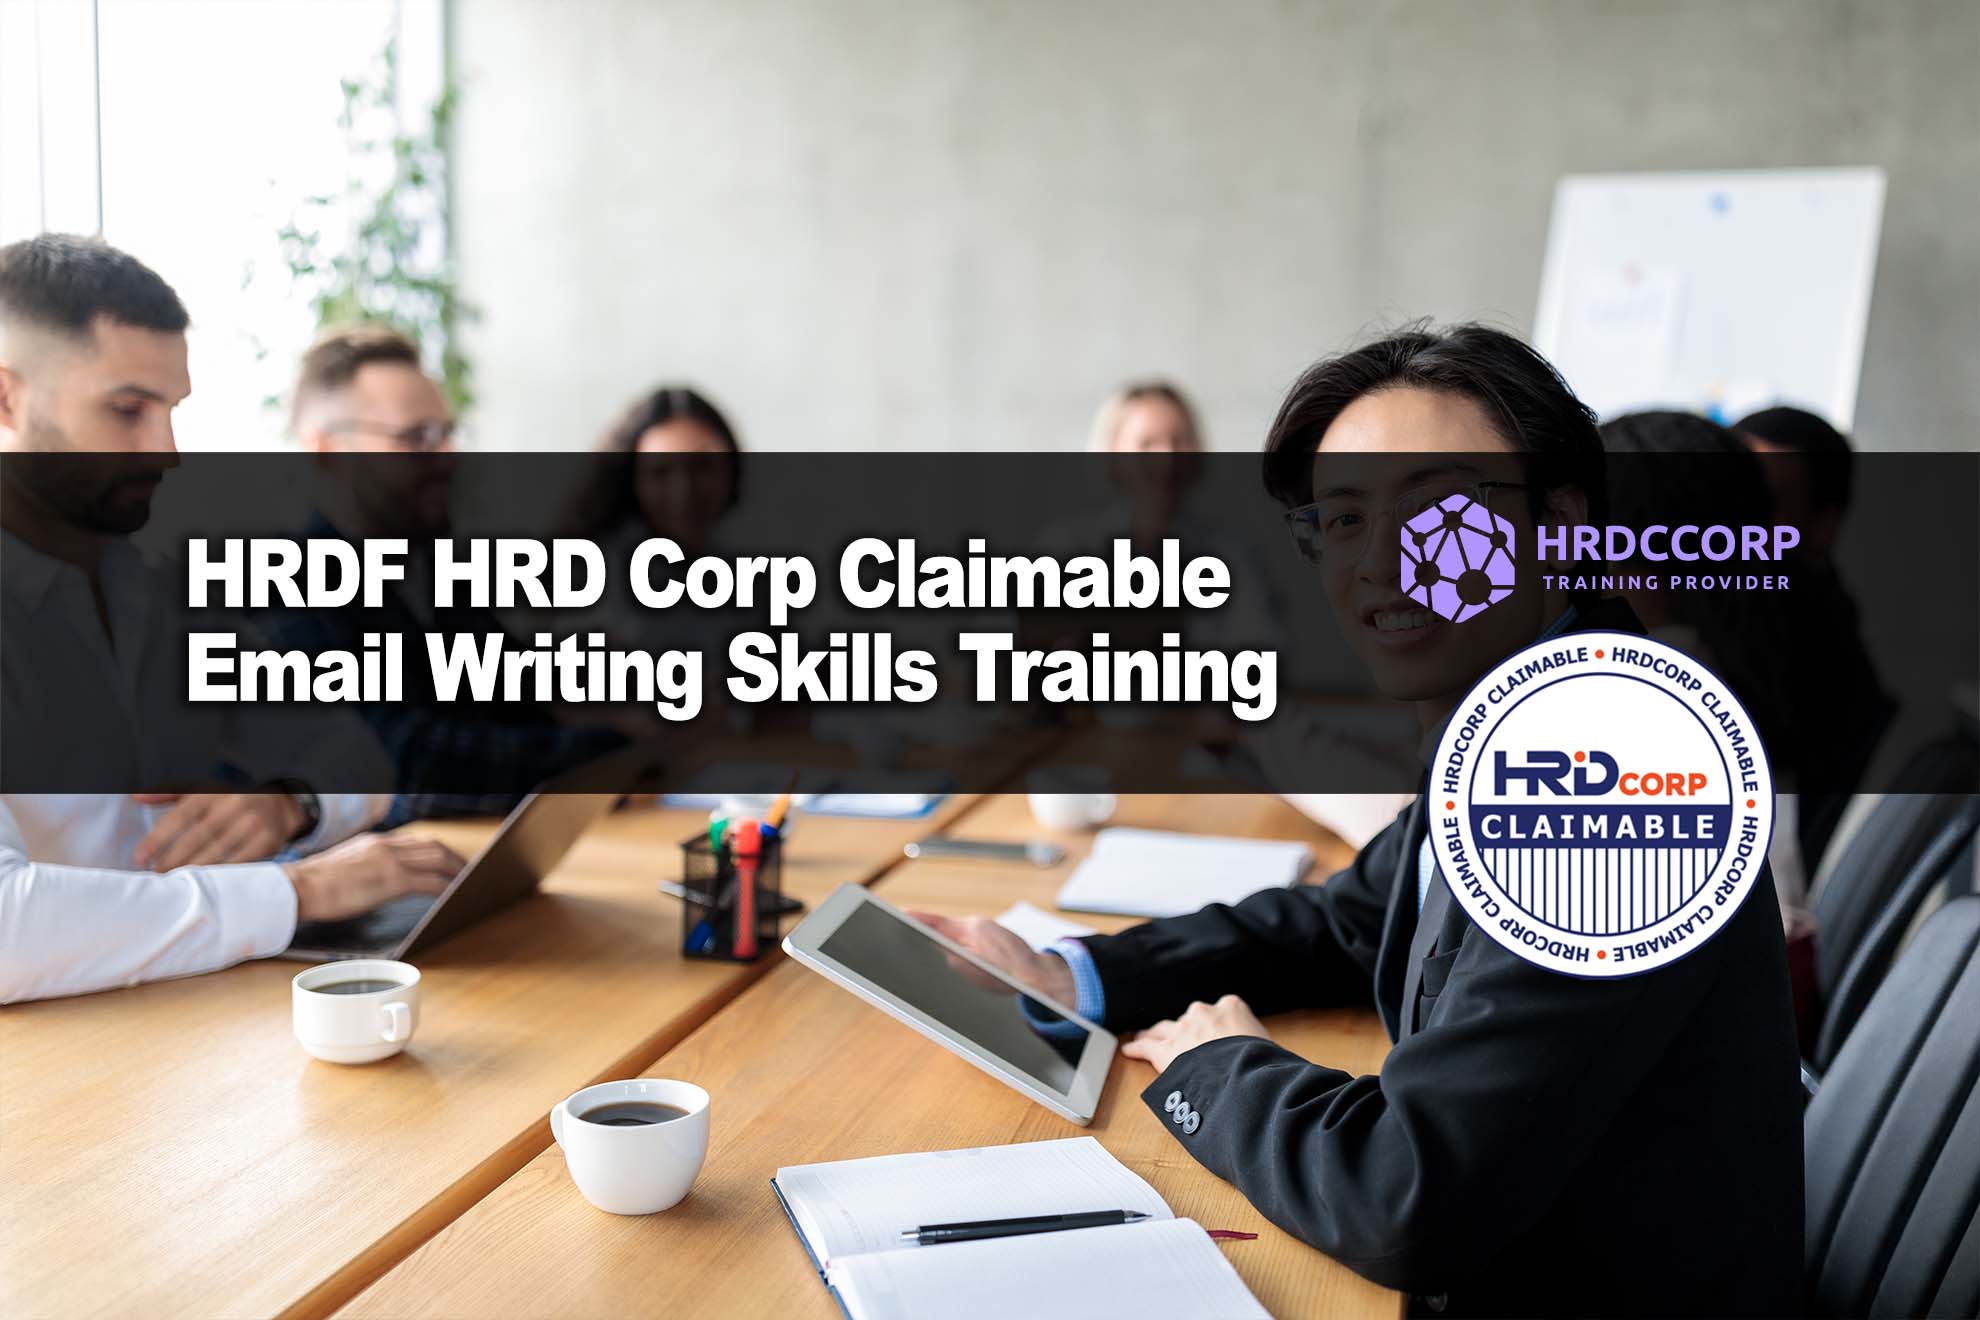 HRDF HRD Corp Claimable Email Writing Skills Training